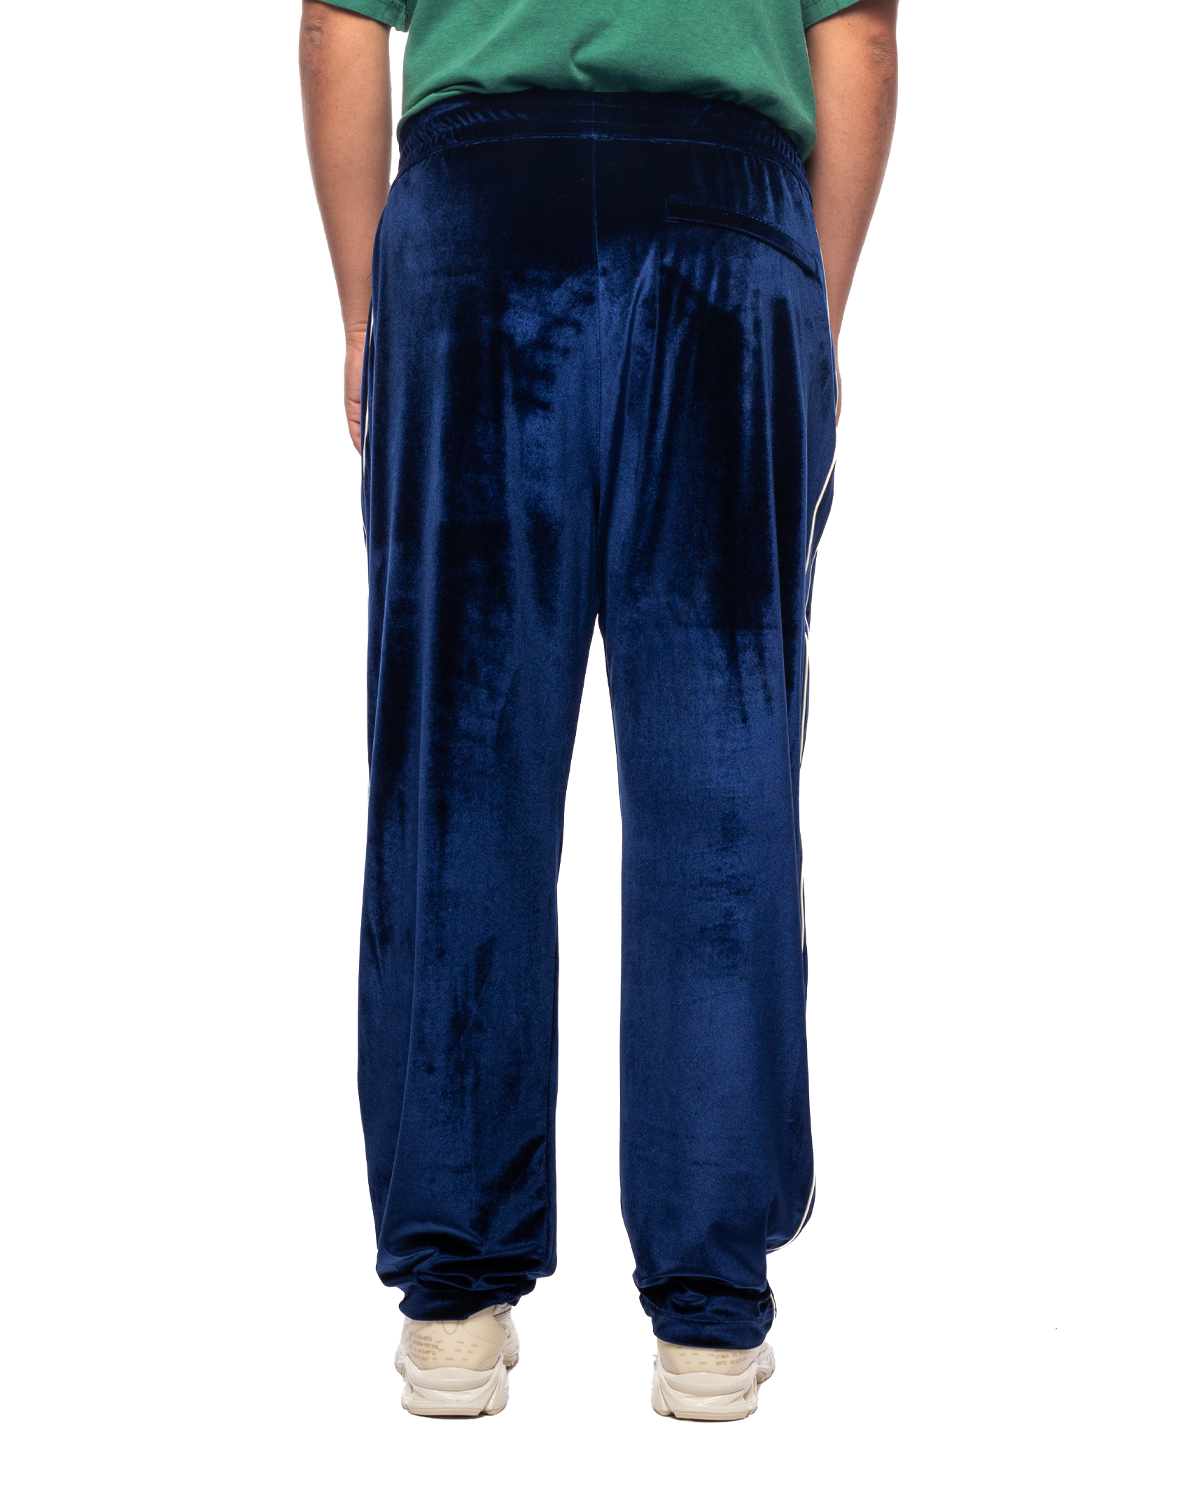 Star "A" Embroidered Velour Track Pant Navy